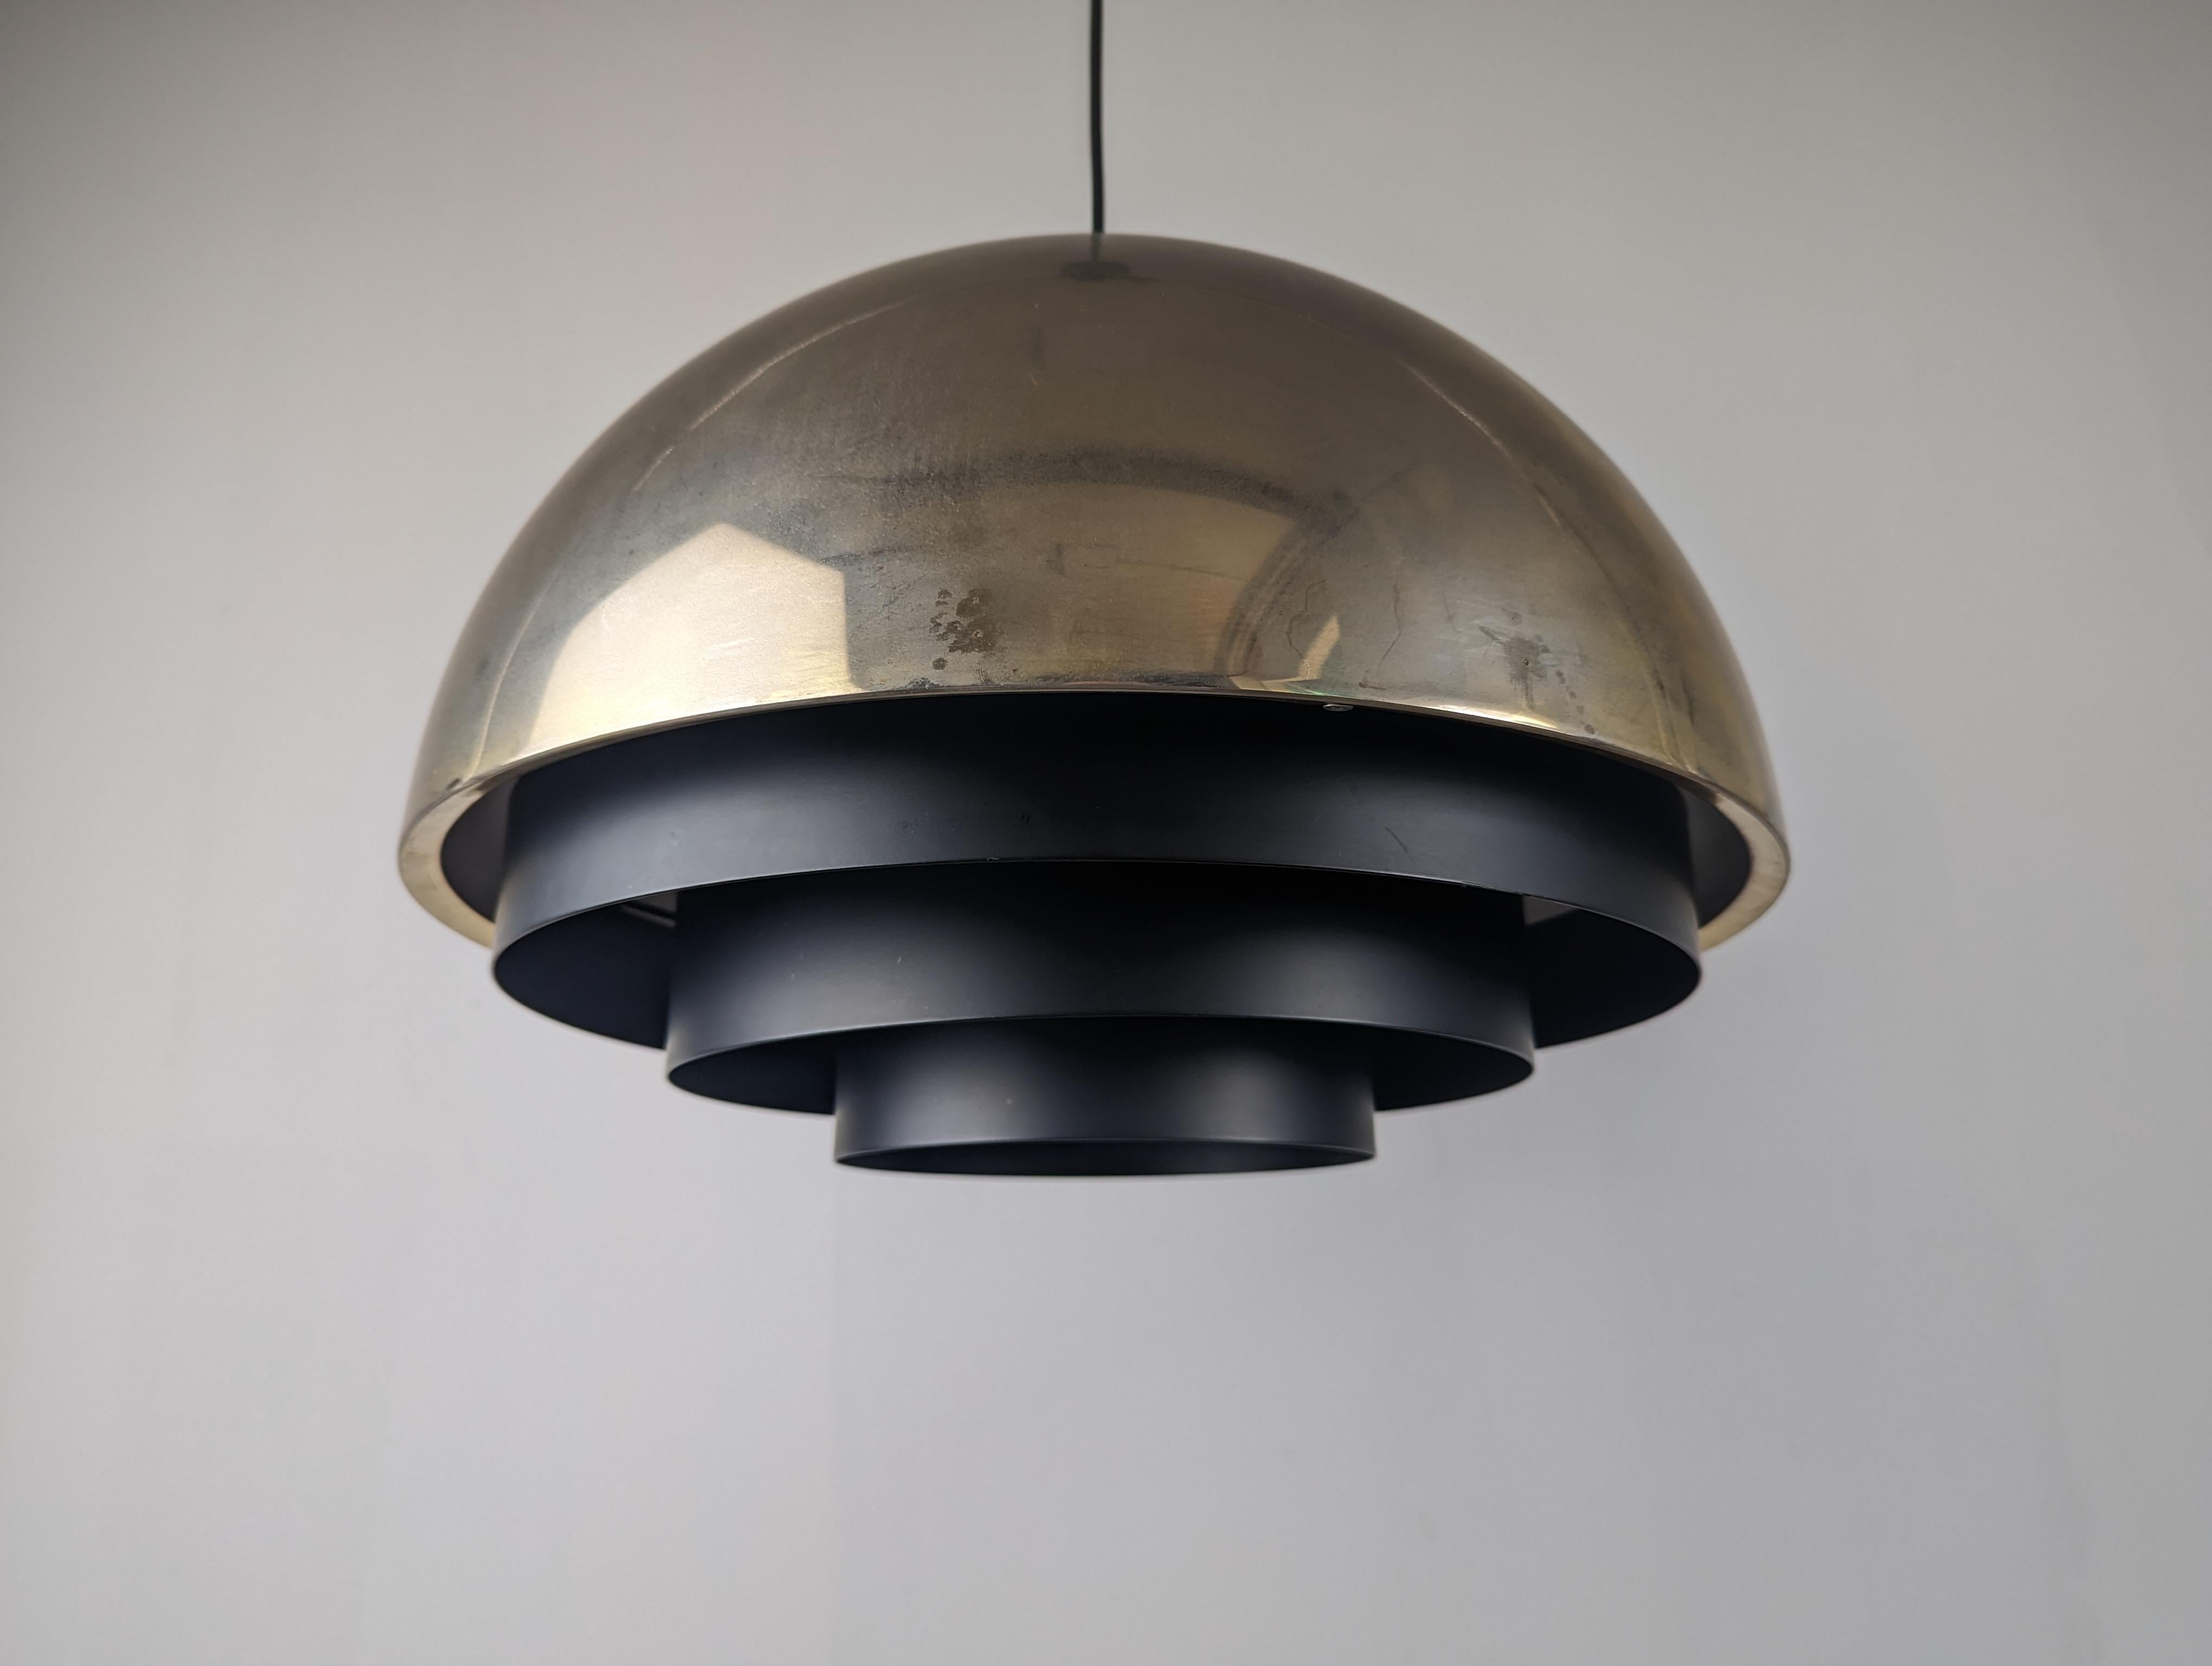 Fantastic lamp in its largest version of the Milieu series that the Danish designer Jo Hammerborg created for the prestigious Fog & Morup. An exclusive super elegant design that combines a chrome upper part with black in the form of three rings,